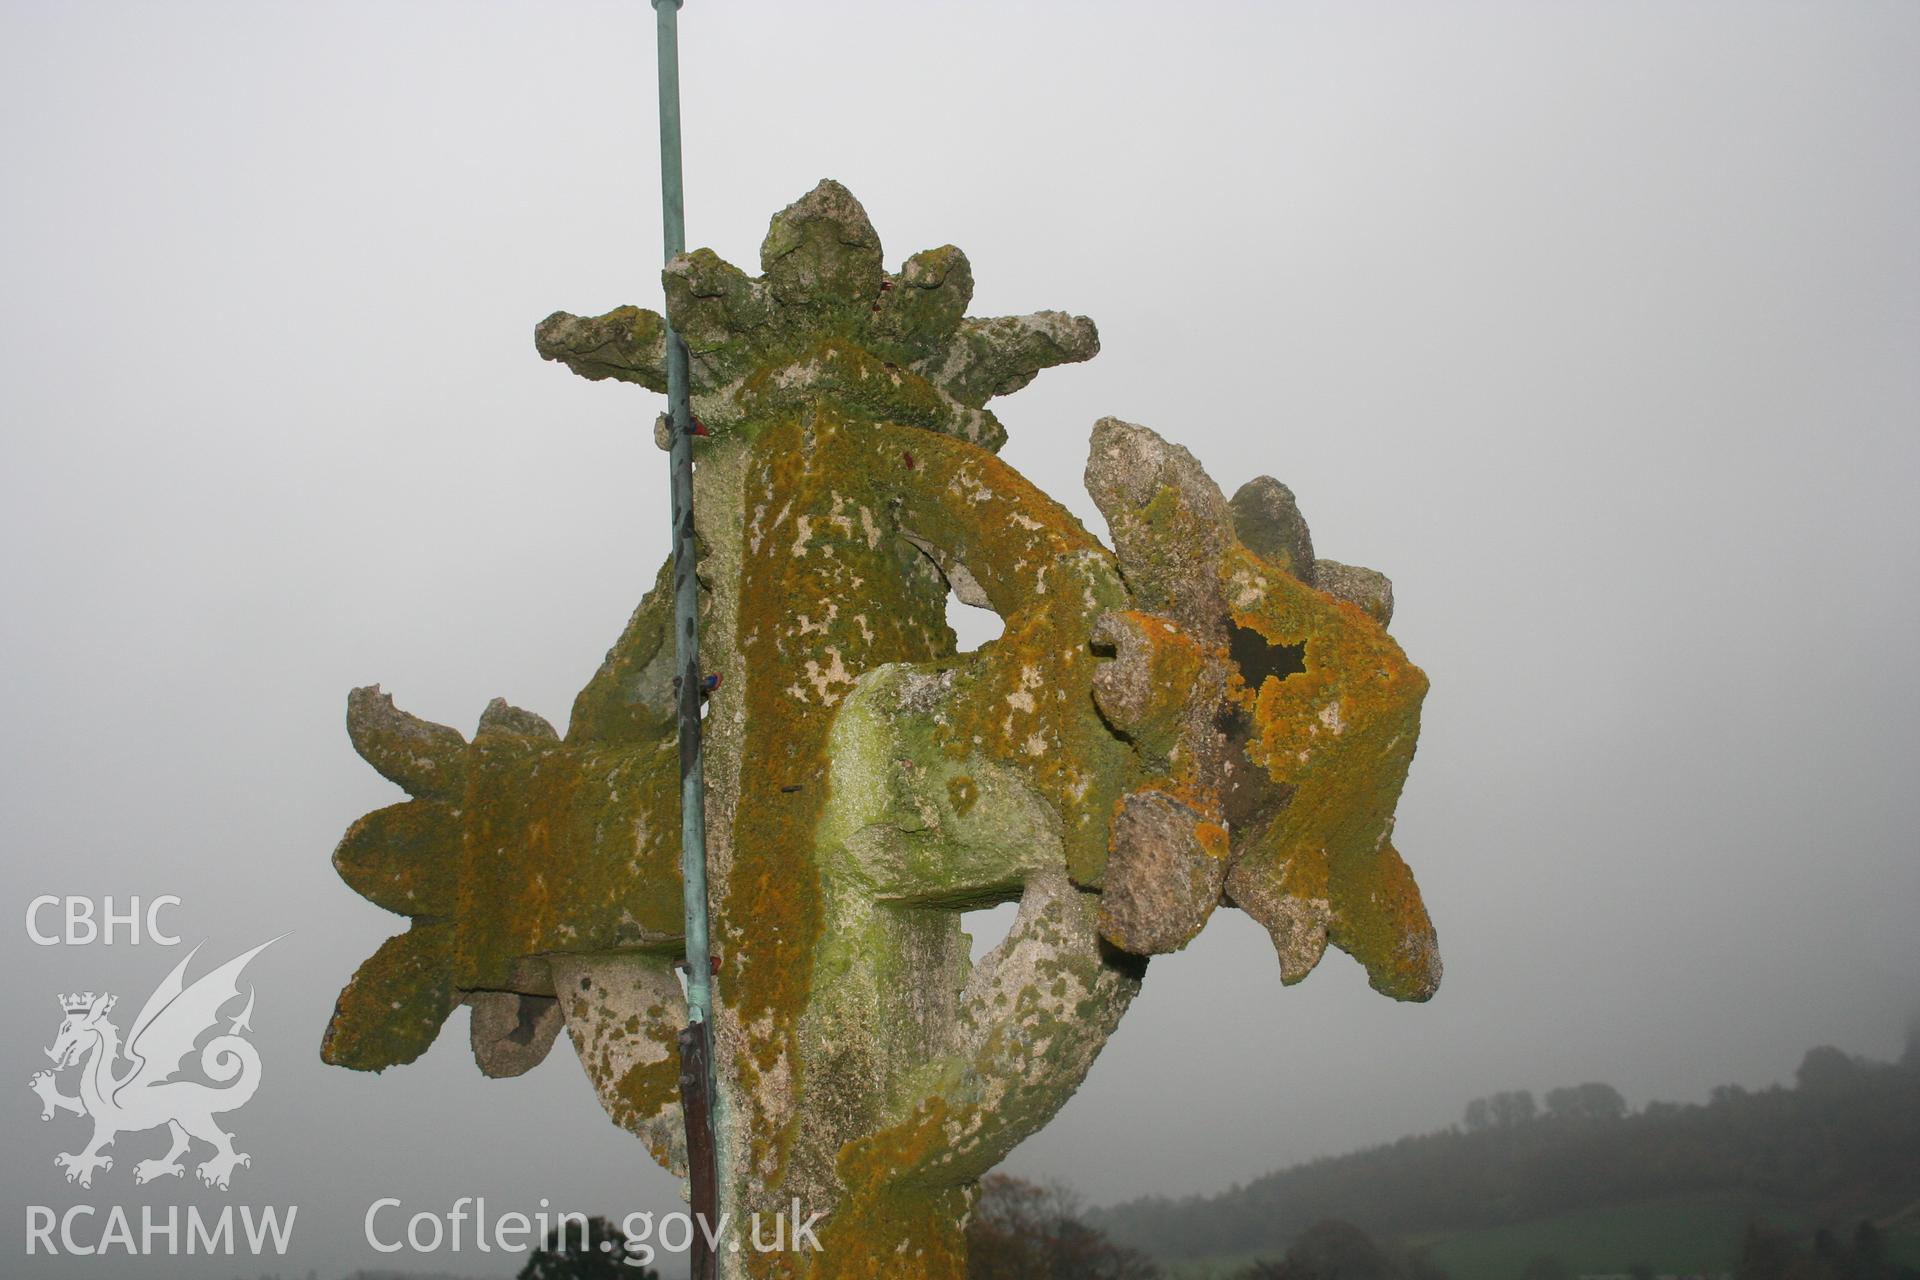 Sculptural detail on the Cornewall Lewis Memorial at New Radnor, taken by Cy Griffiths of Powys County Council, November 2011